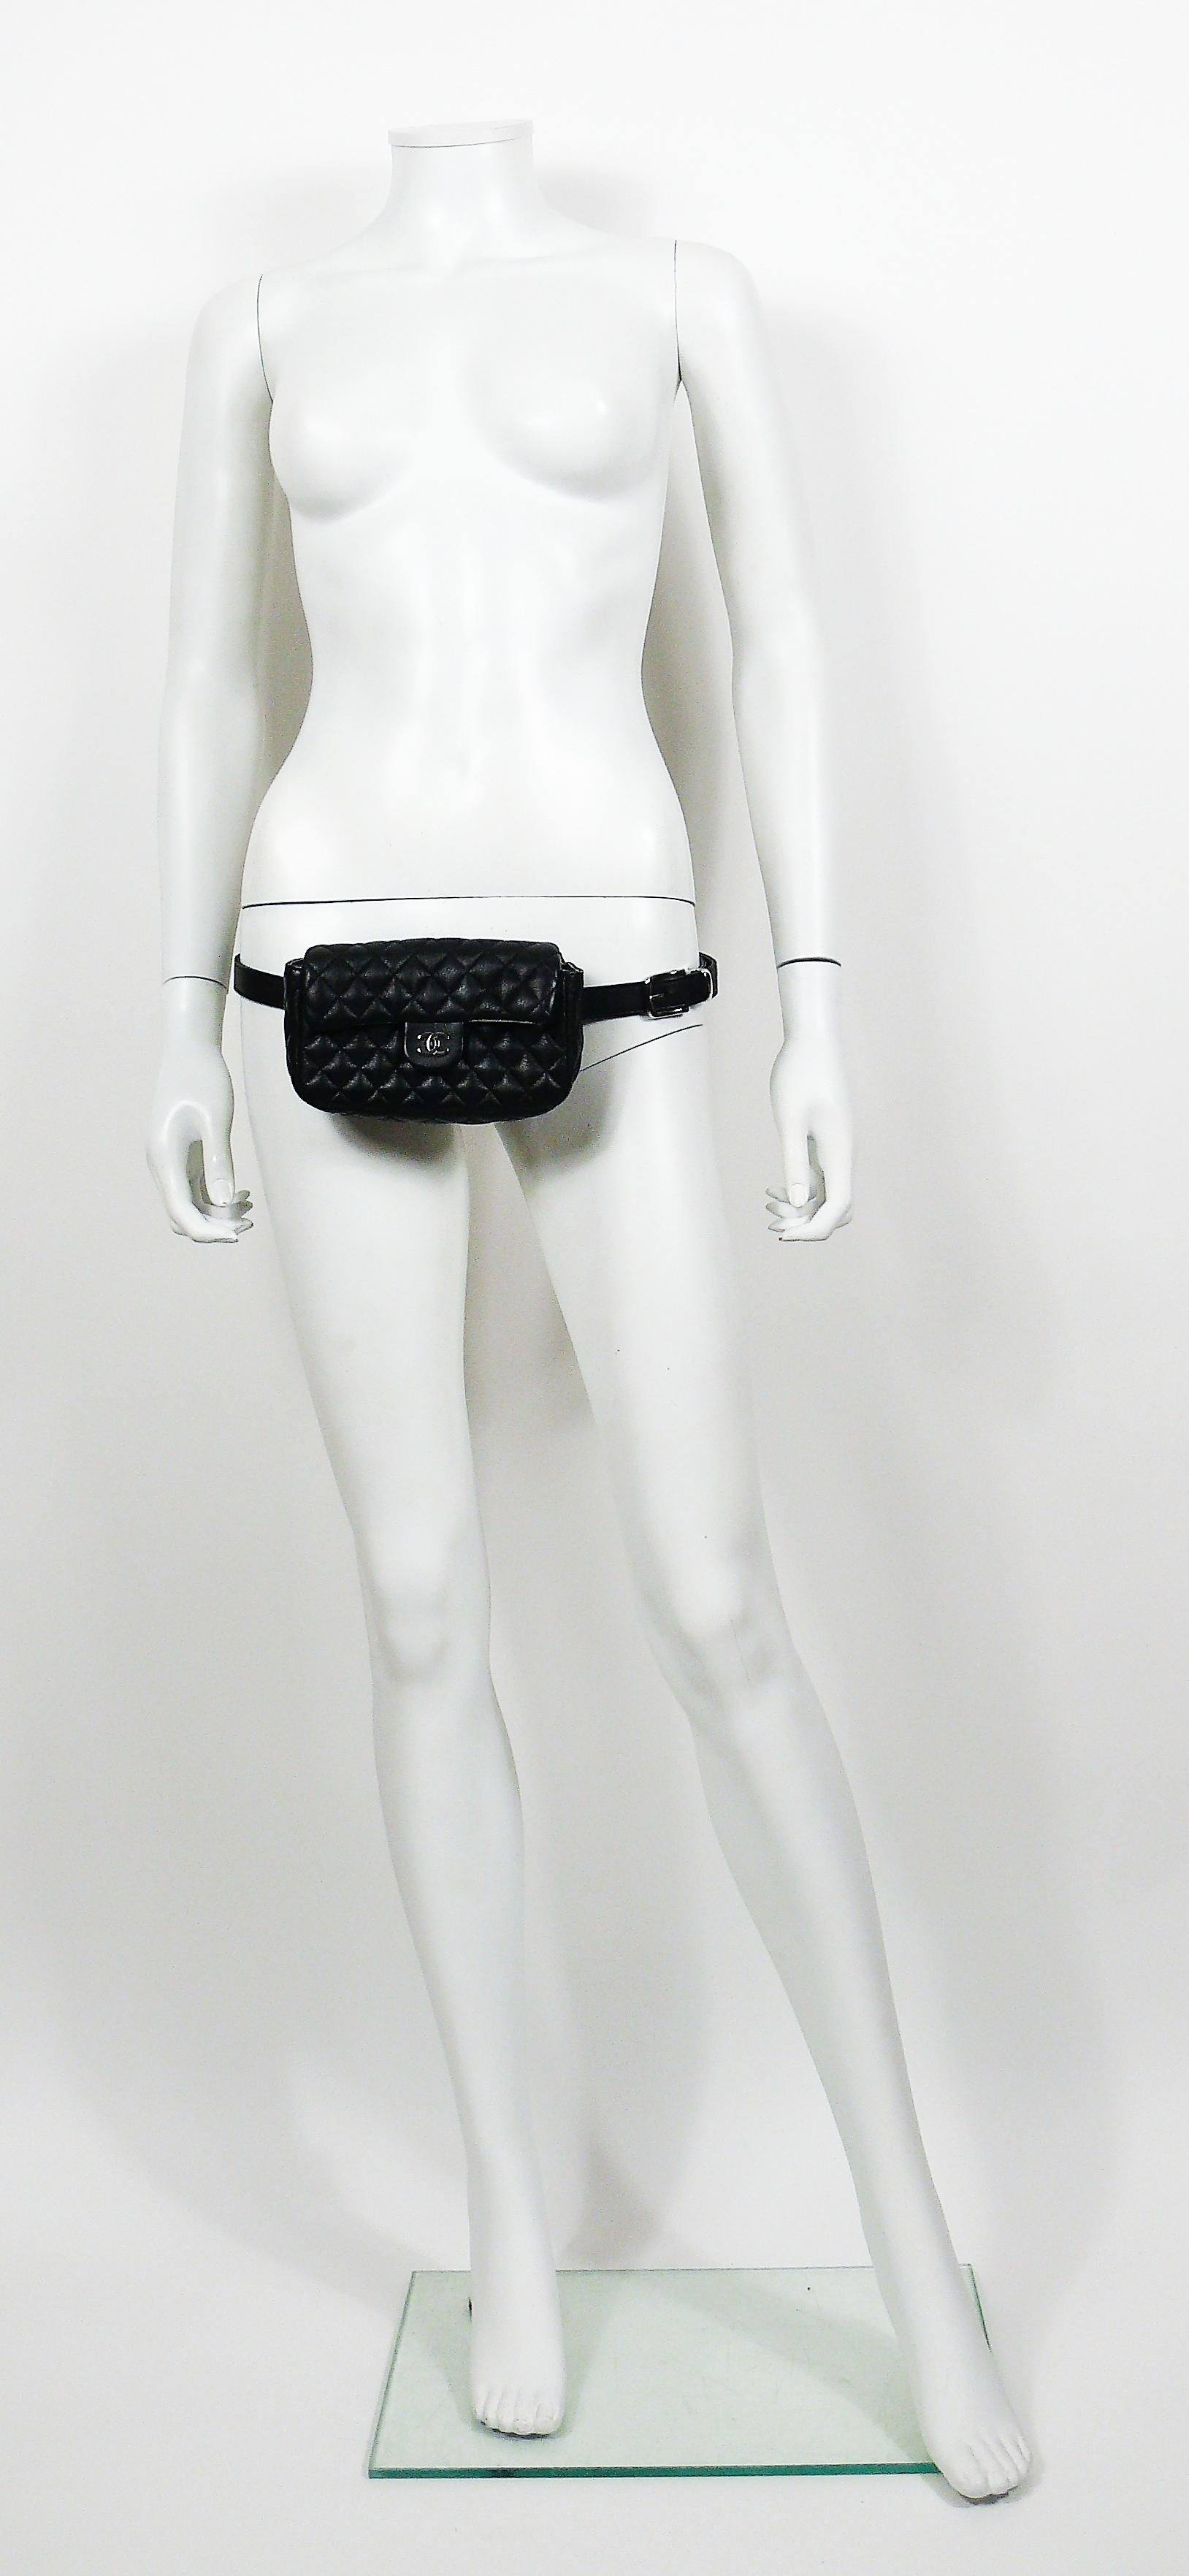 CHANEL UNIFORM black quilted leather waist-belt bag.

Please note that this item was original part of a CHANEL uniform.

This bag features :
- Flap top with magnetic snap closure featuring a CC logo.
- Waist belt strap with buckle closure